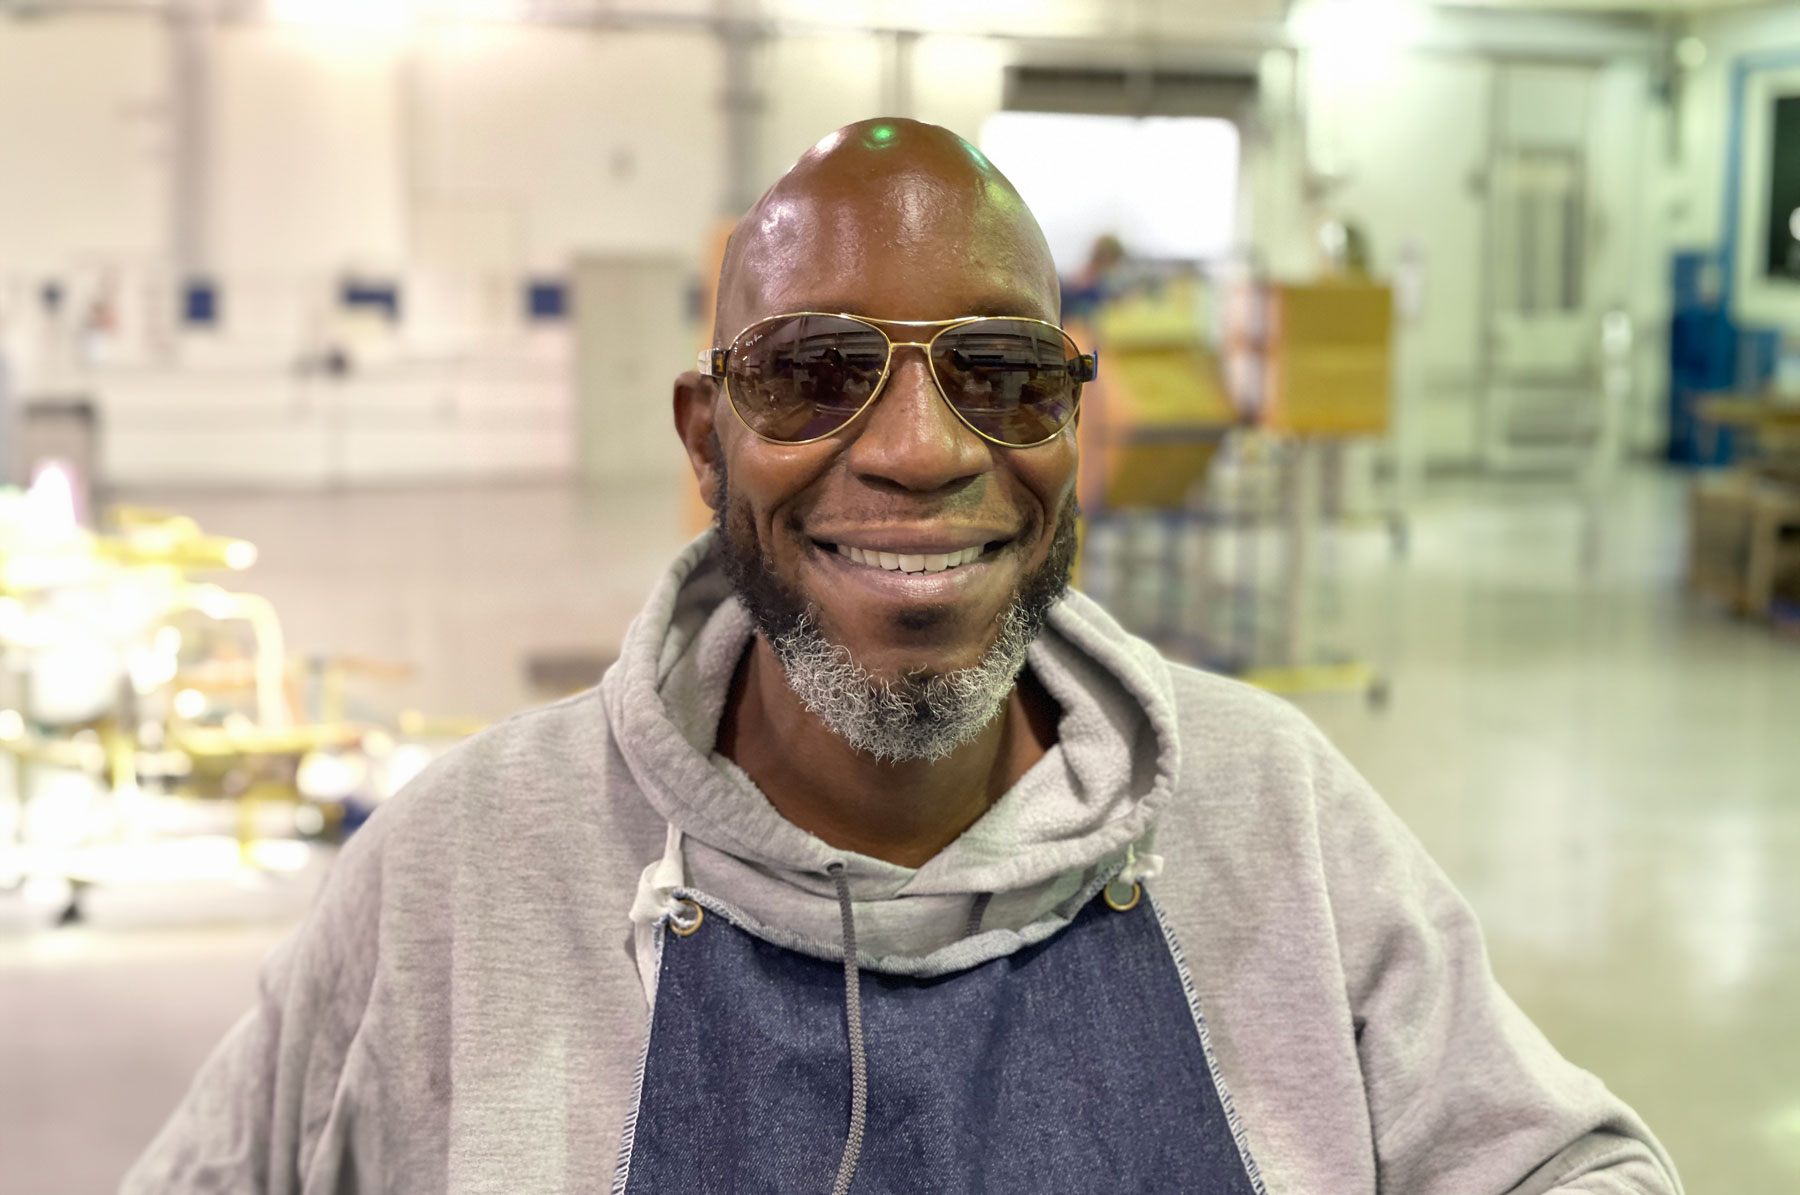 A portrait of a dark skinned man with a bald head smiling and wearing sunglasses.